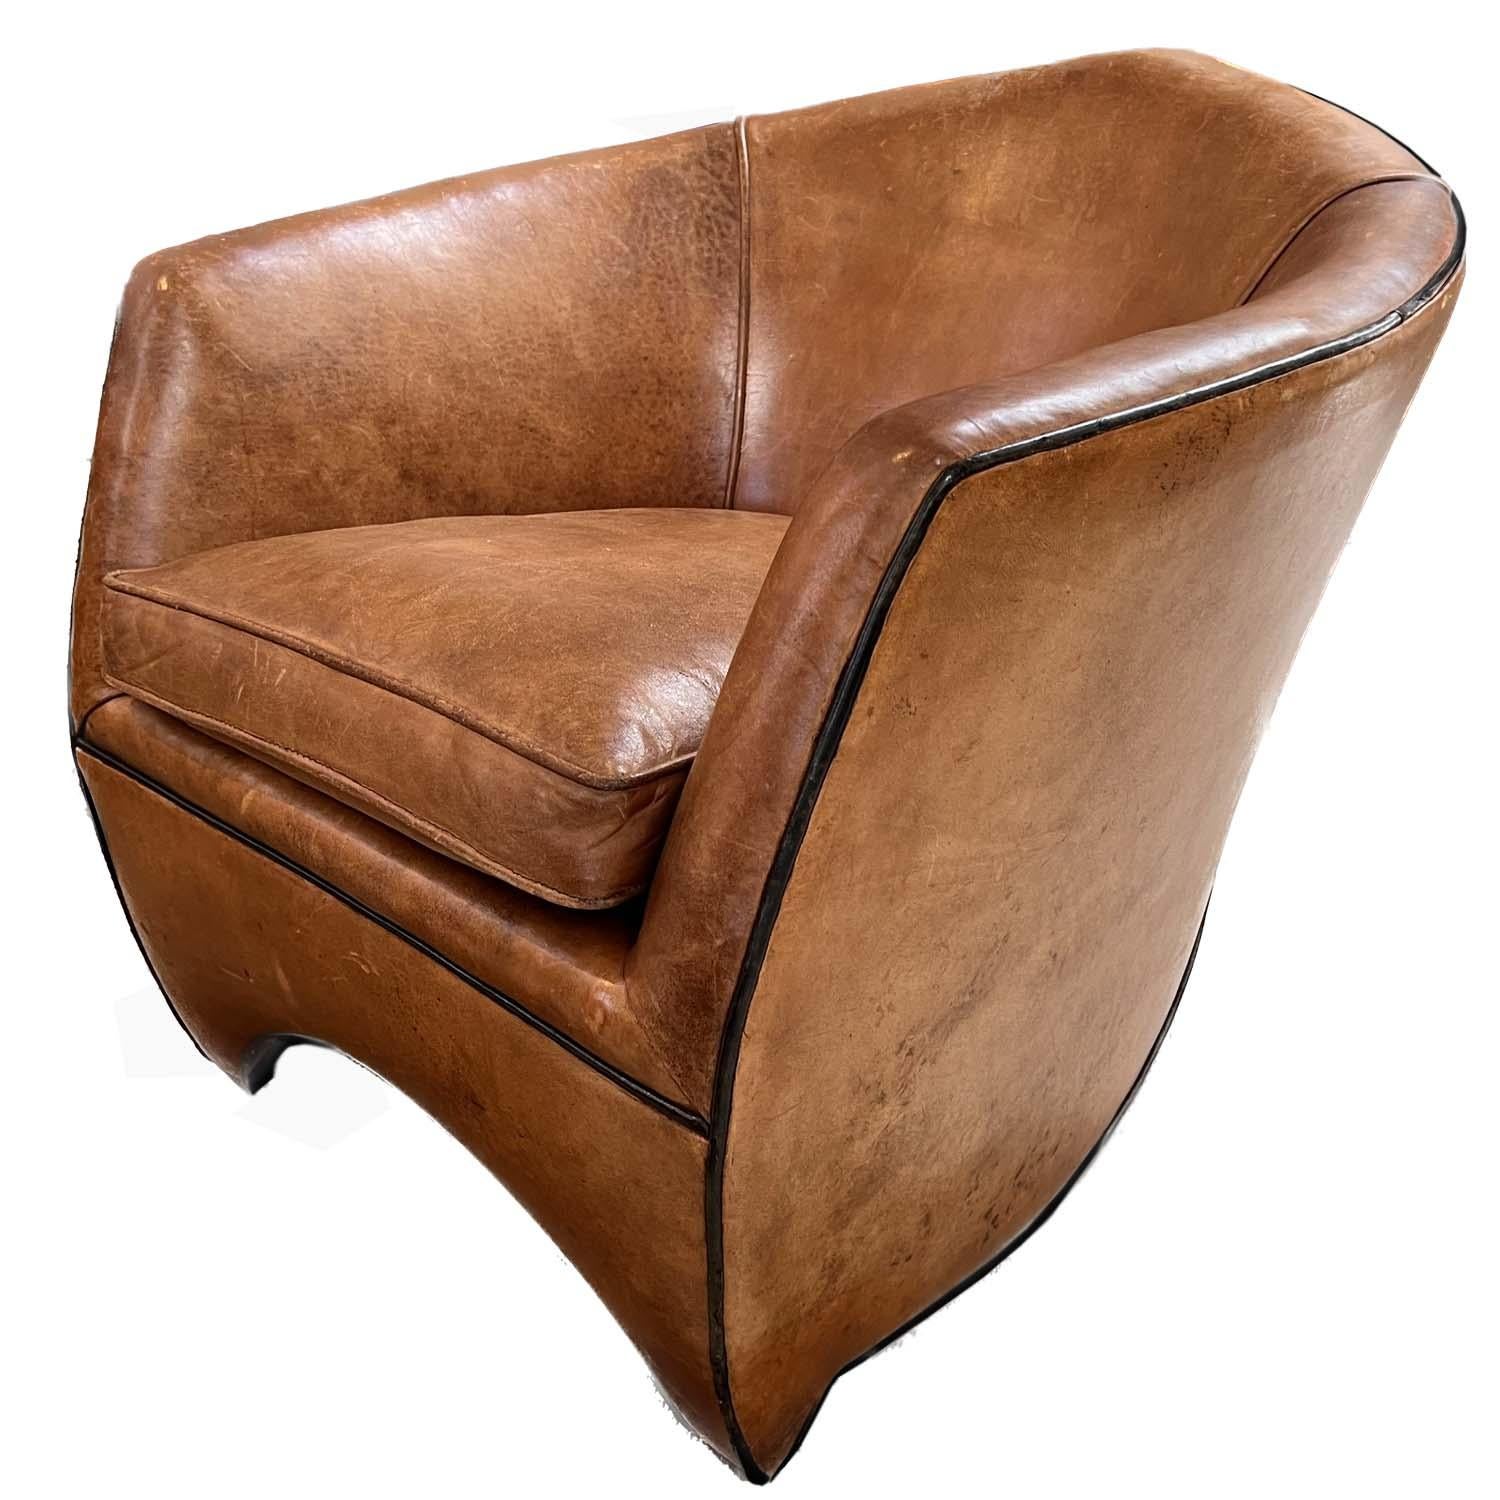 20th Century Pair of Bart Van Bekhoven, 'Cocoon' Lounge Chair, Leather, the Netherlands